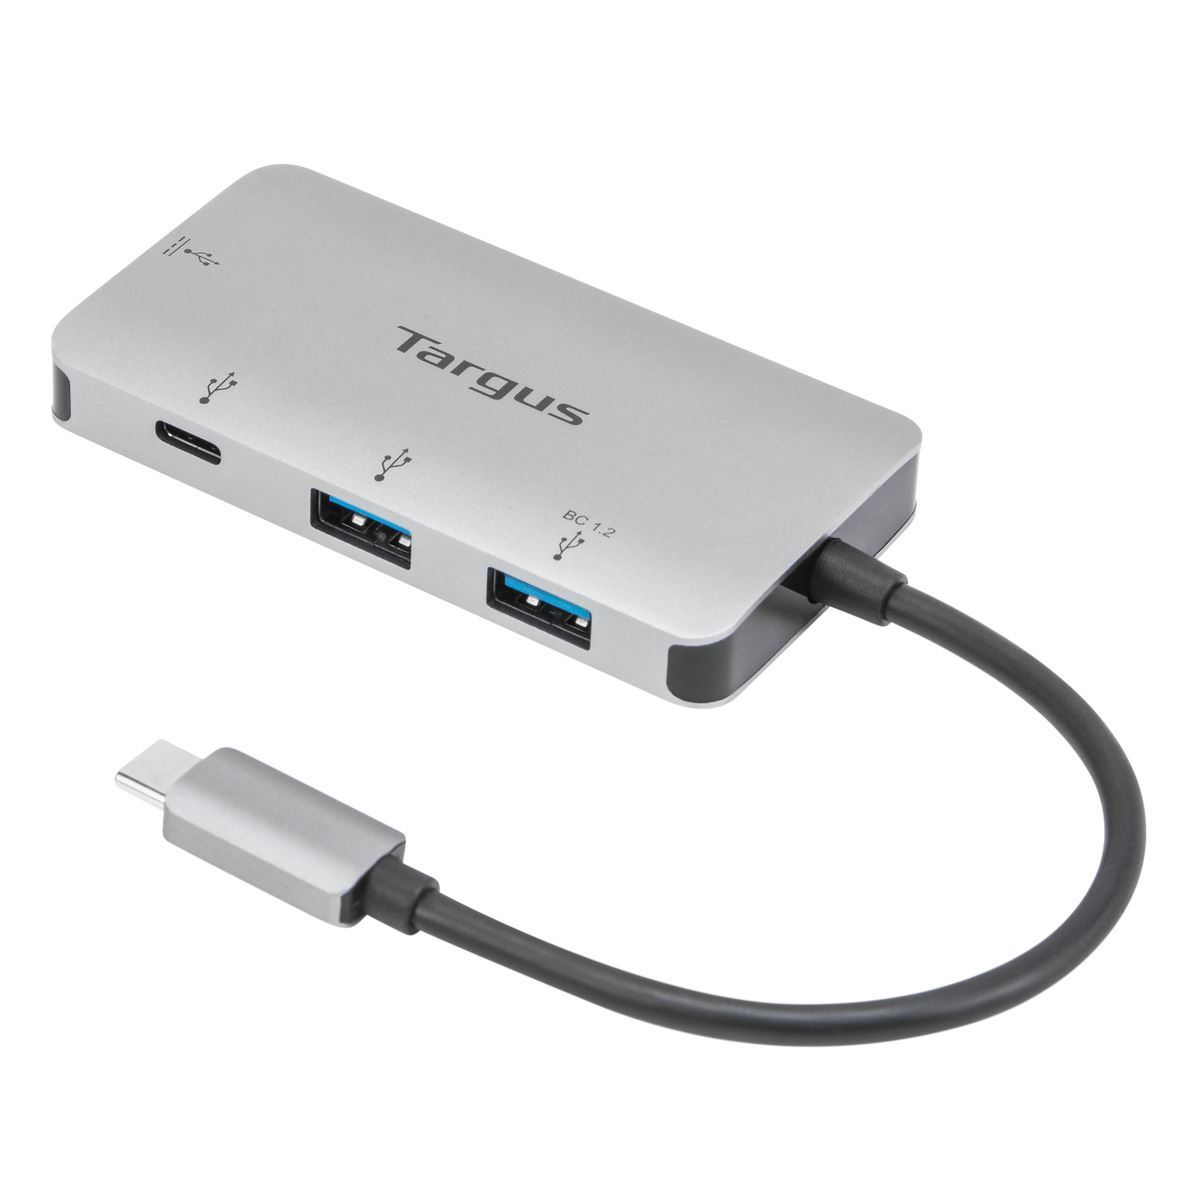 https://www.targus.com/content/images/thumbs/0056710_usb-c-multi-port-hub-with-2x-usb-a-and-2x-usb-c-ports-with-100w-pd-pass-thru.jpeg